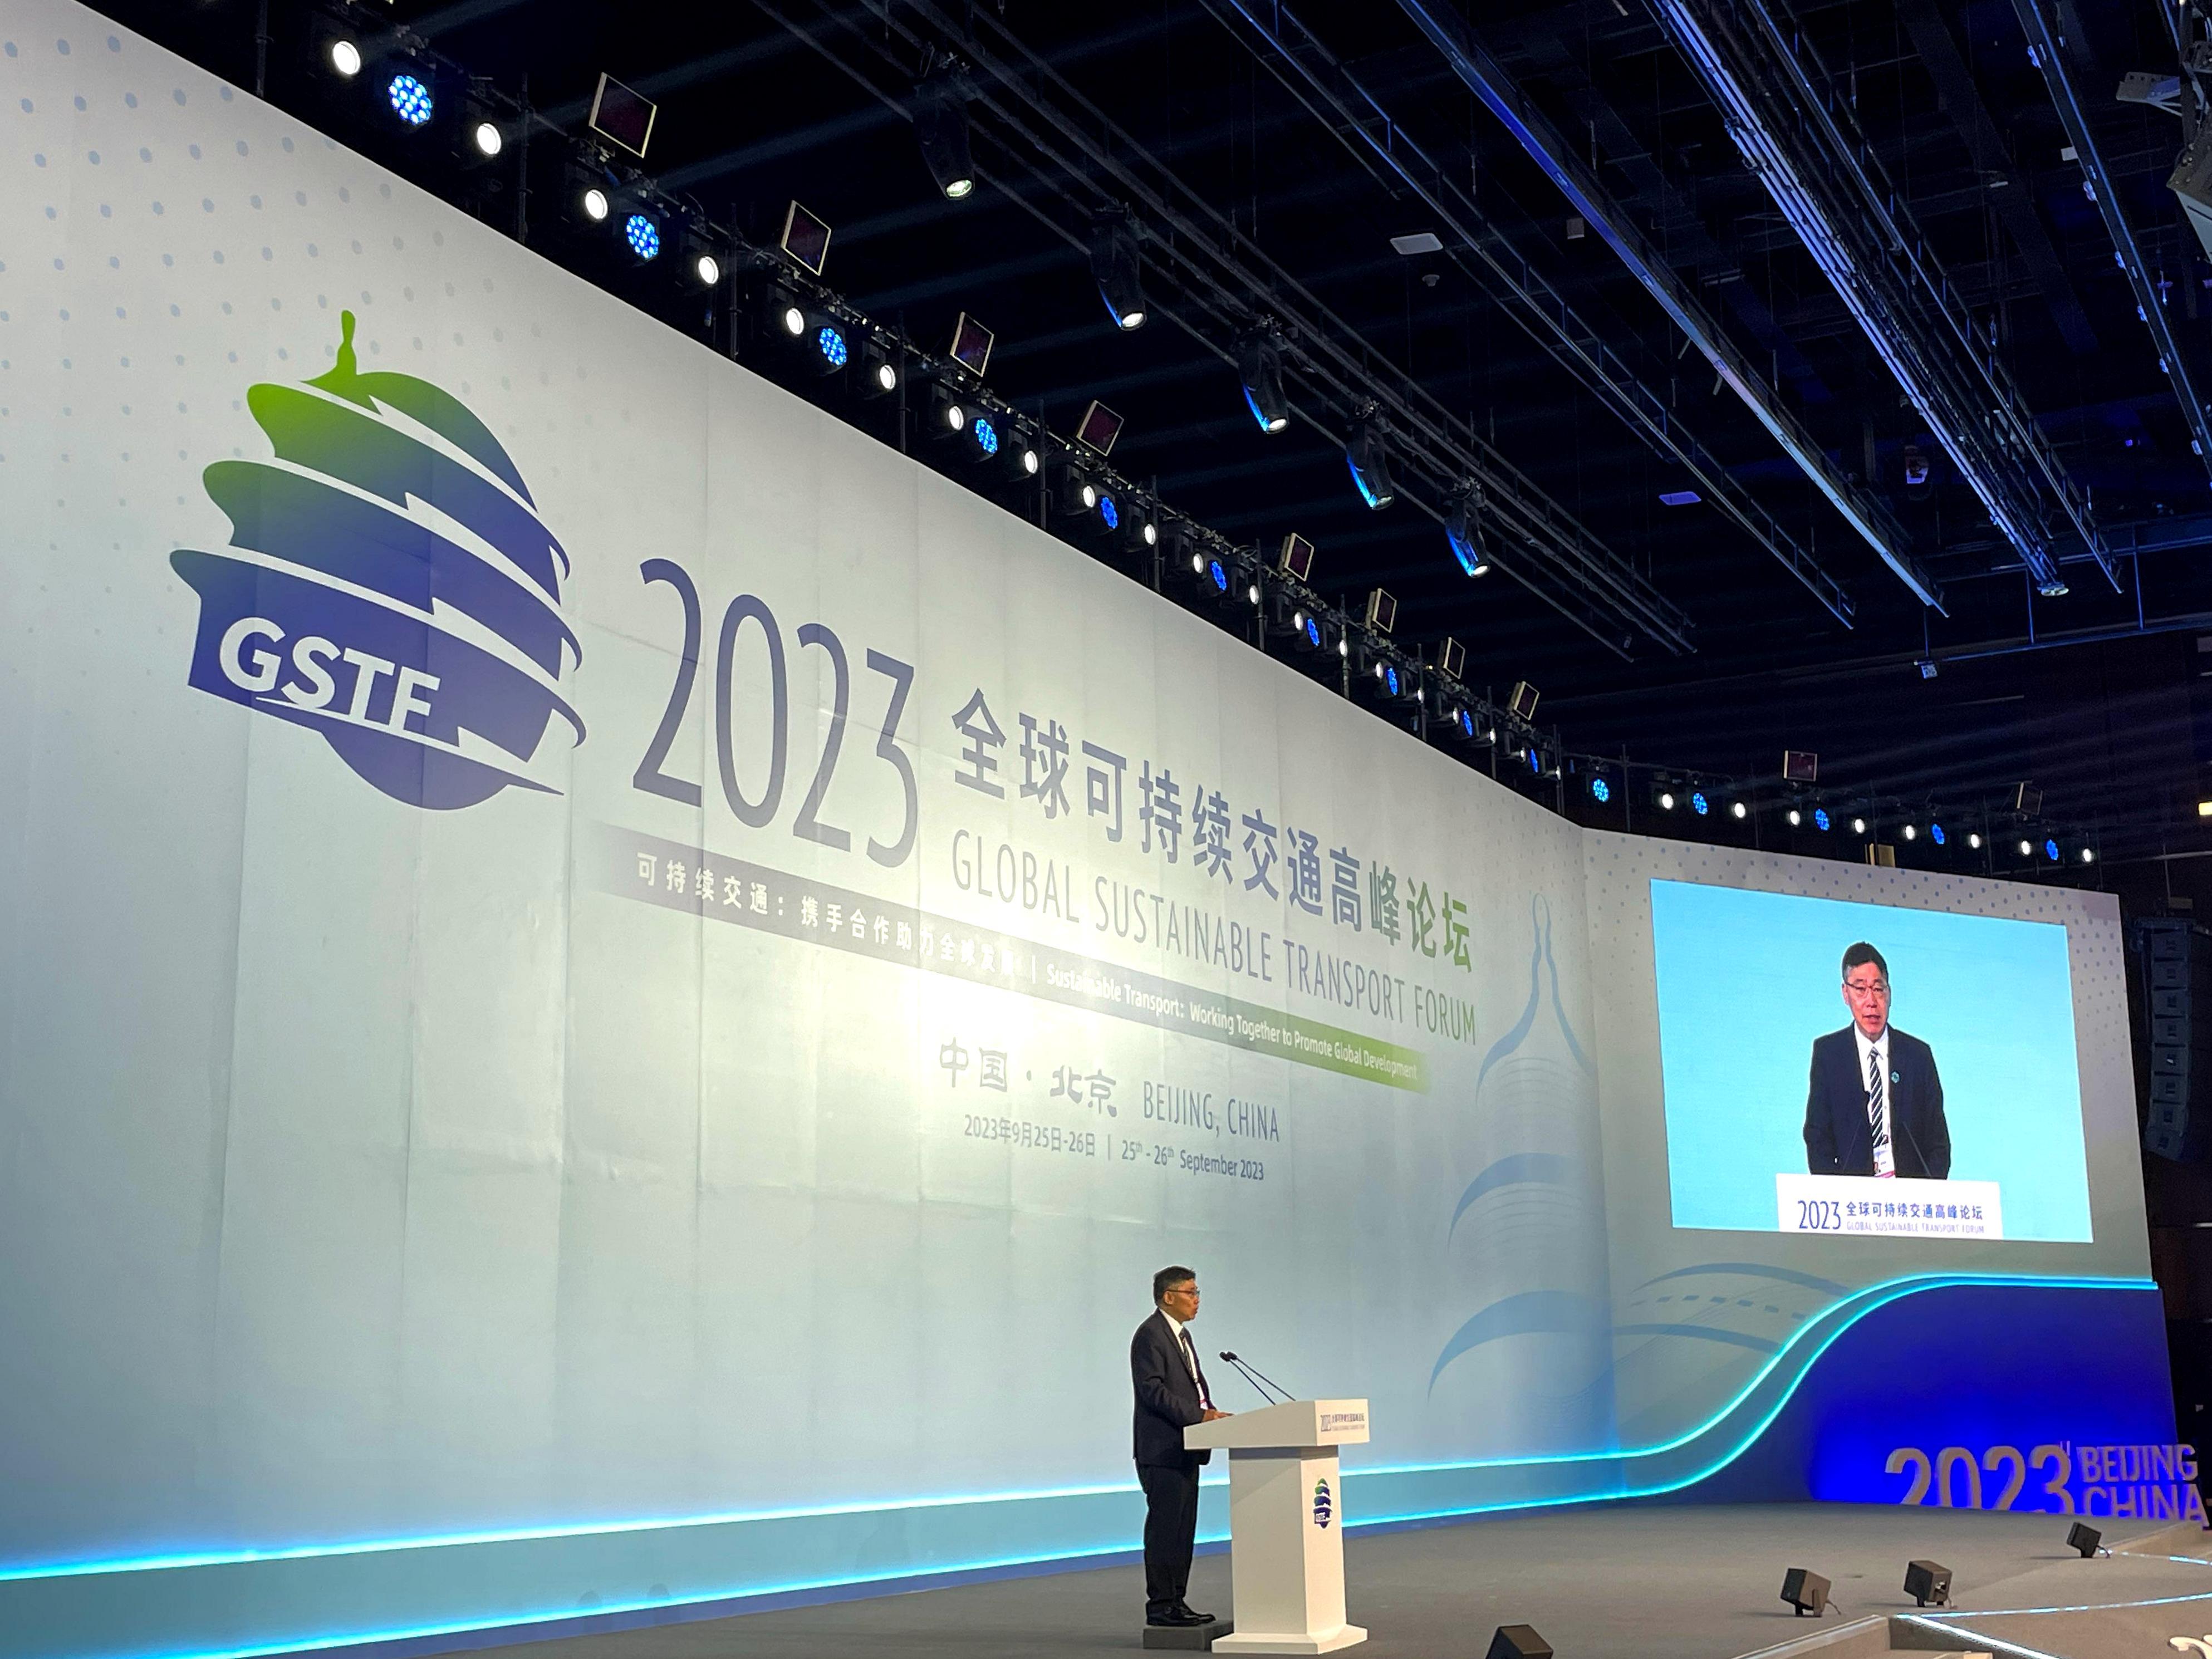 The Secretary for Transport and Logistics, Mr Lam Sai-hung, continued his visit to Beijing today (September 26) to attend the Global Sustainable Transport Forum (2023), where he shared with other participants Hong Kong's development in smart mobility and smart logistics at a thematic session.